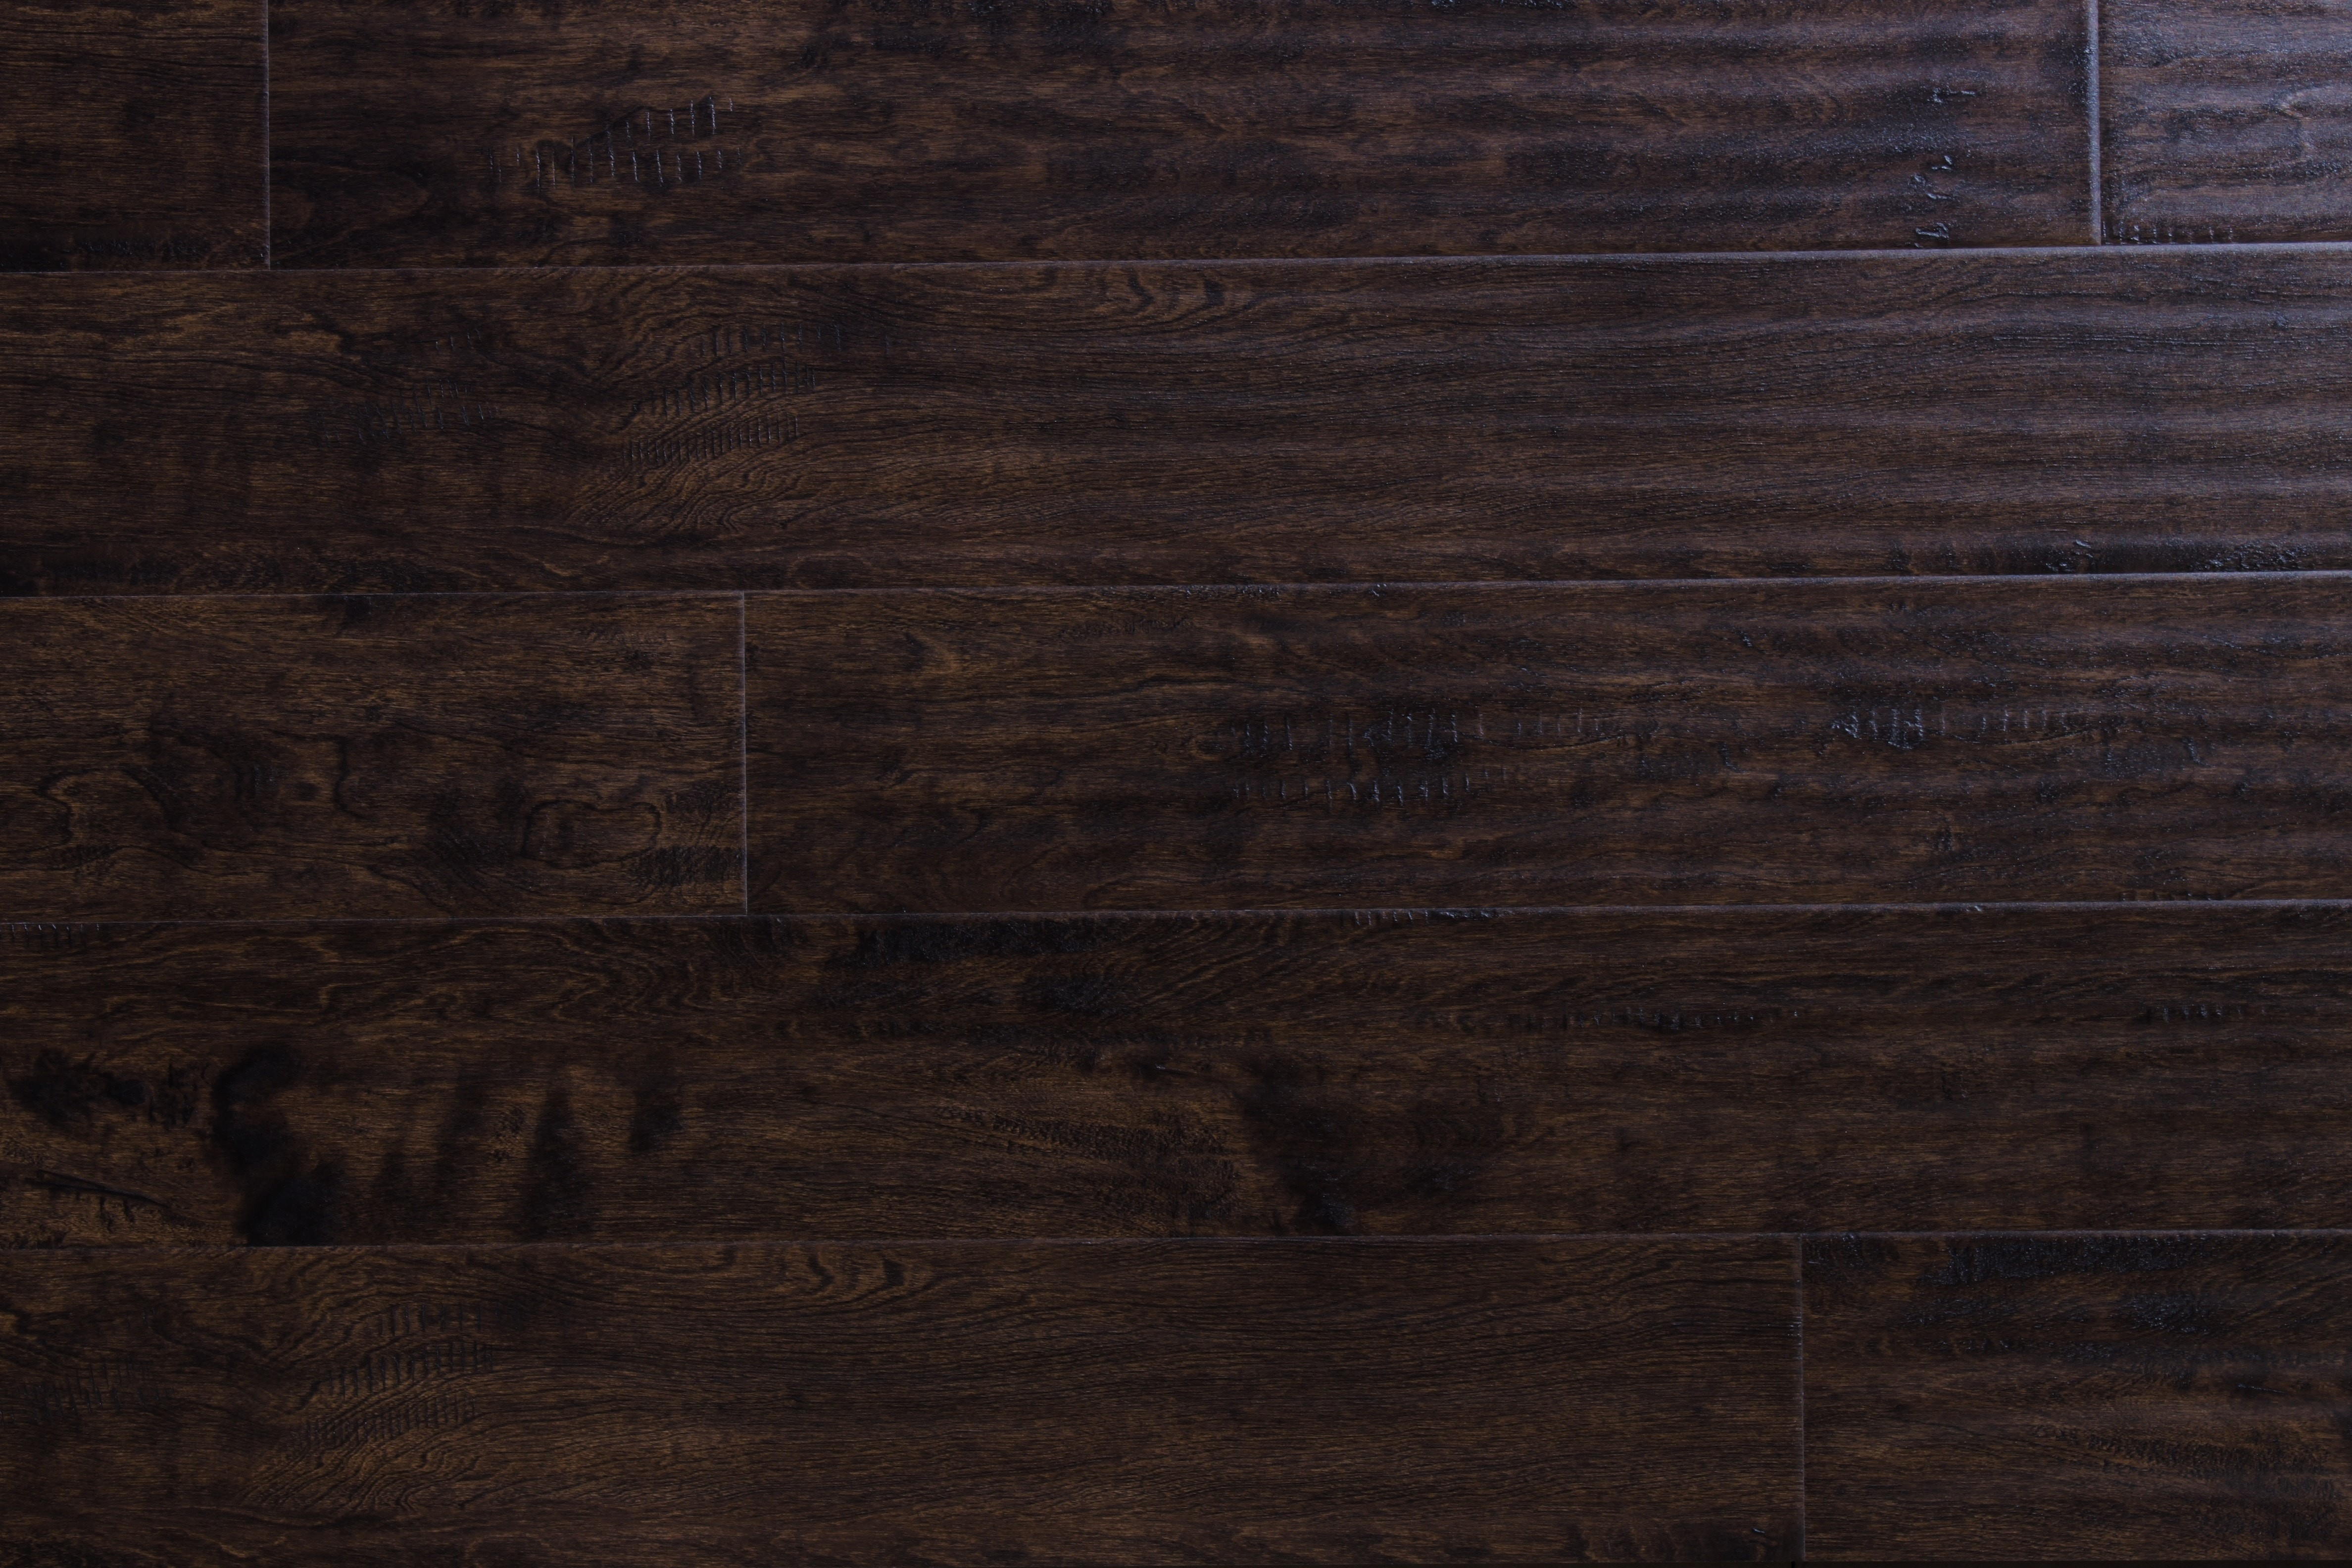 15 Wonderful Engineered Hardwood Flooring Prices Canada 2024 free download engineered hardwood flooring prices canada of wood flooring free samples available at builddirecta intended for tailor multi gb 5874277bb8d3c